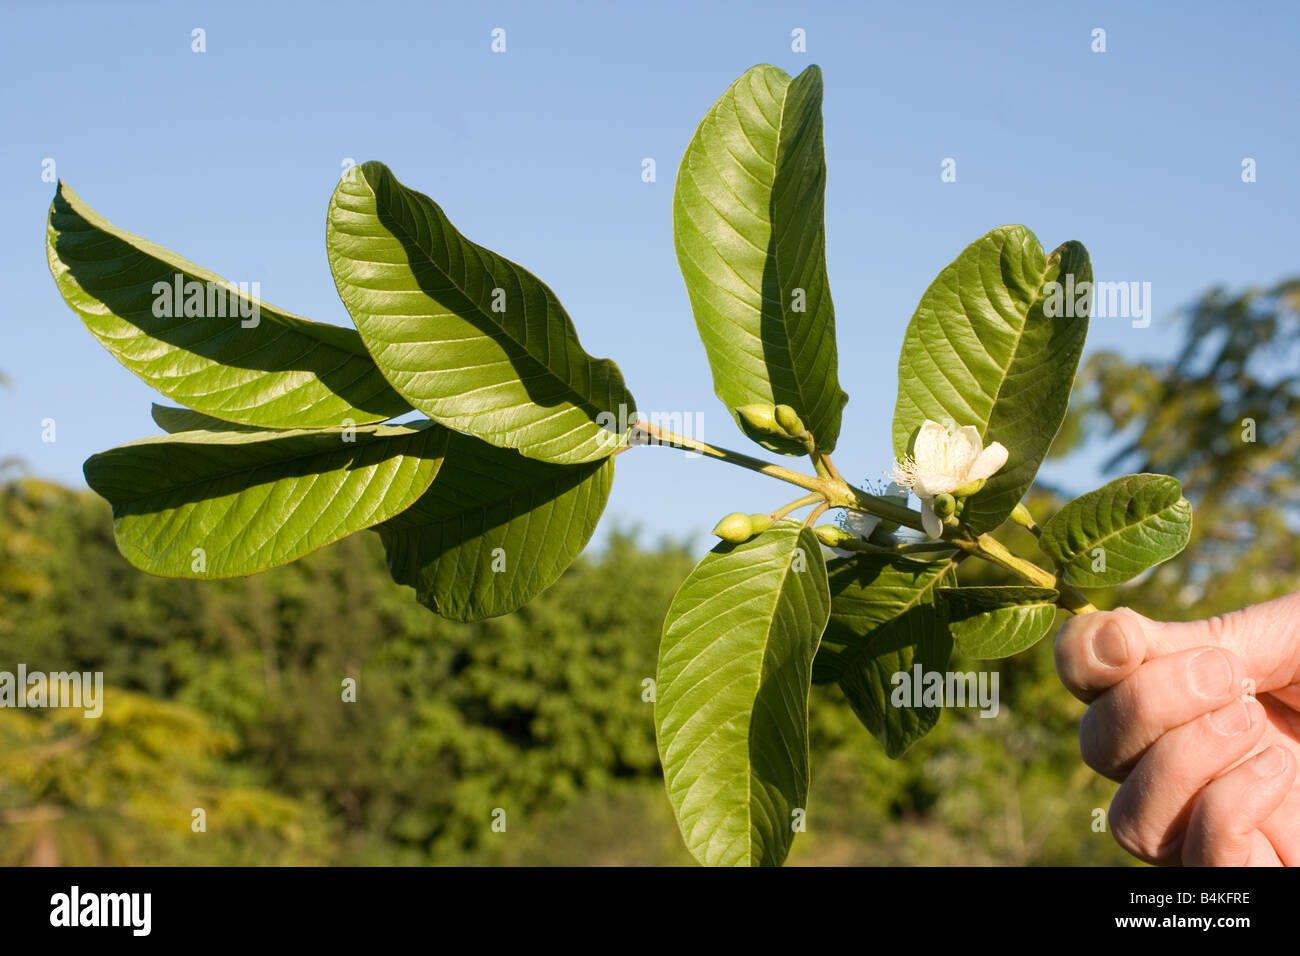 Guava leaves and blossom Stock Photo